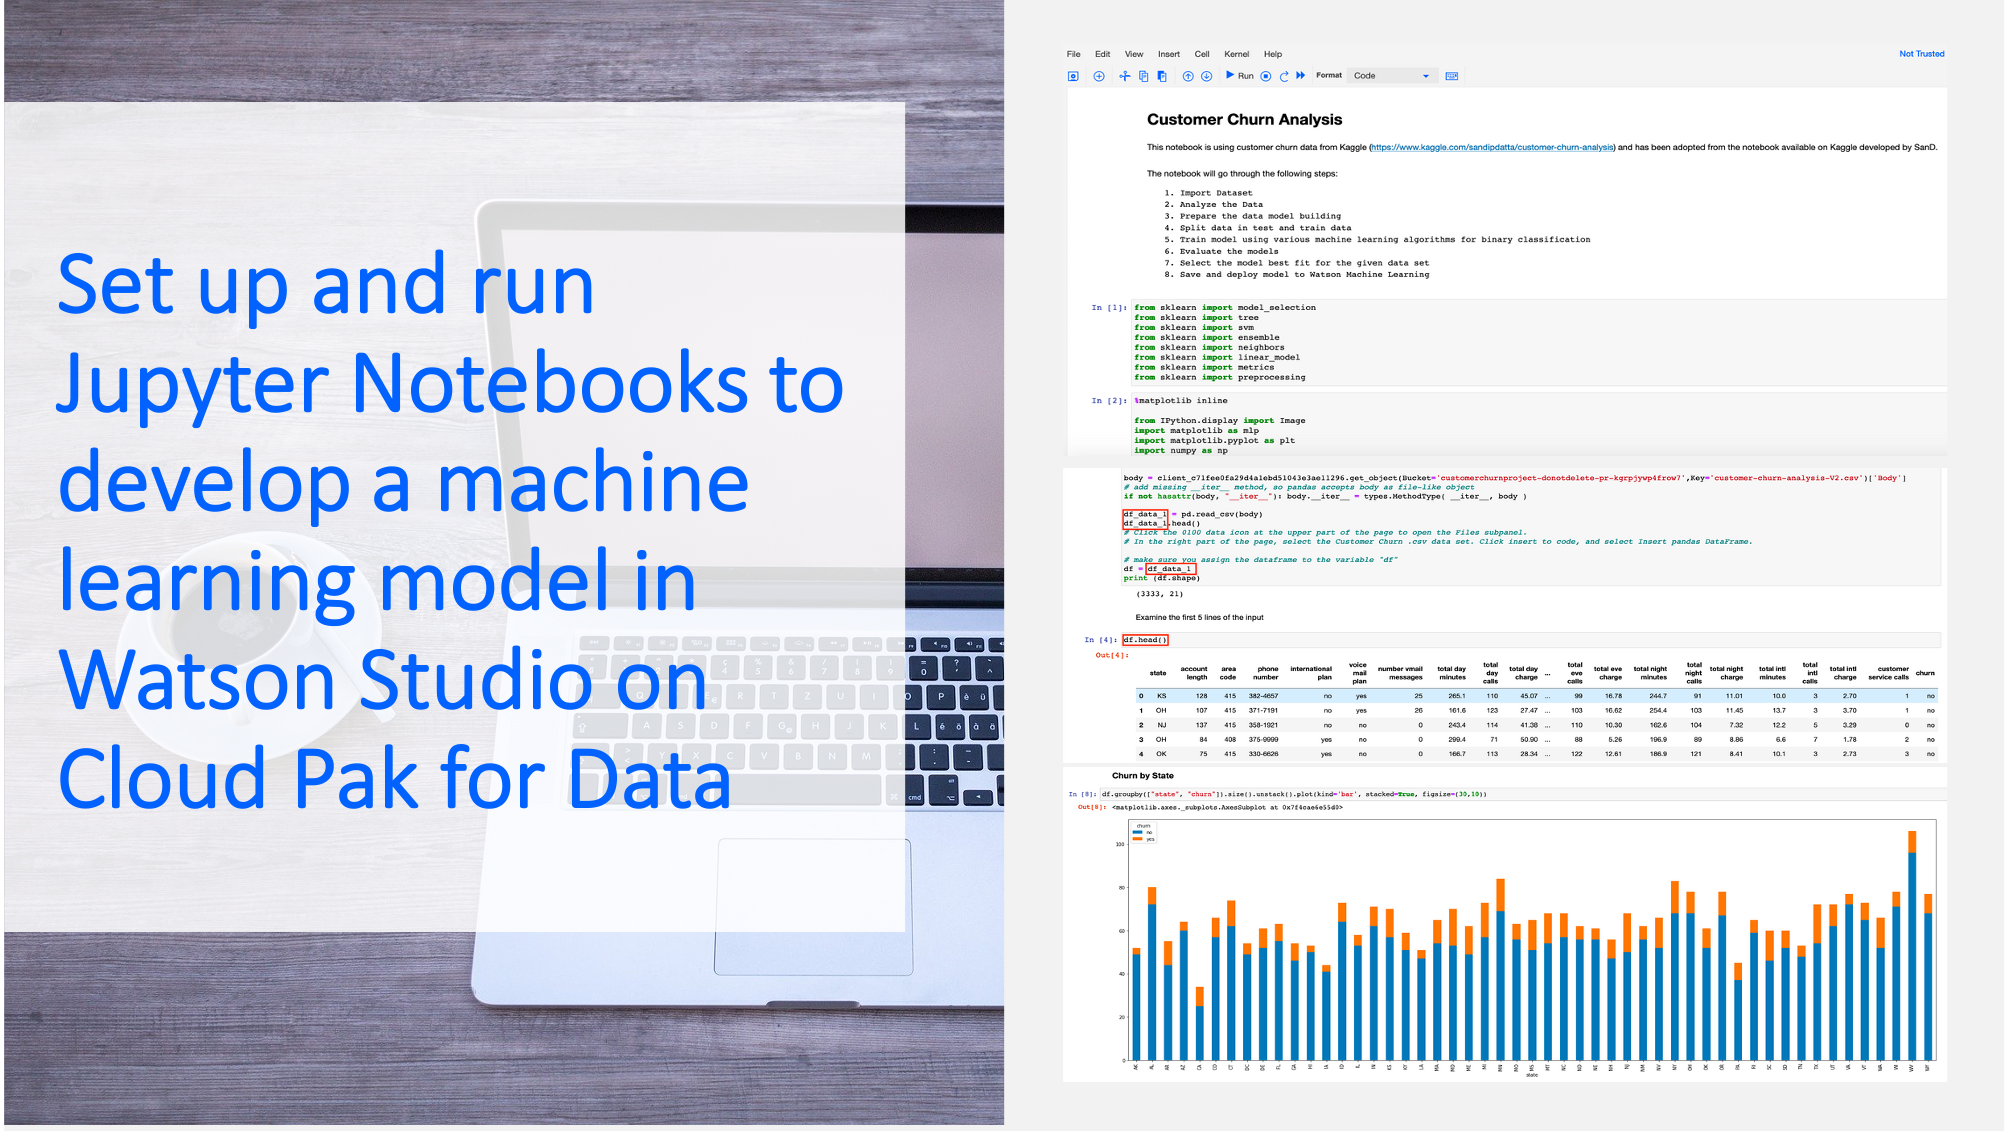 Set-up-and-run-Jupyter-Notebooks-to-develop-a-machine-learning-model-in-Watson-Studio-on-Cloud-Pak-for-Data